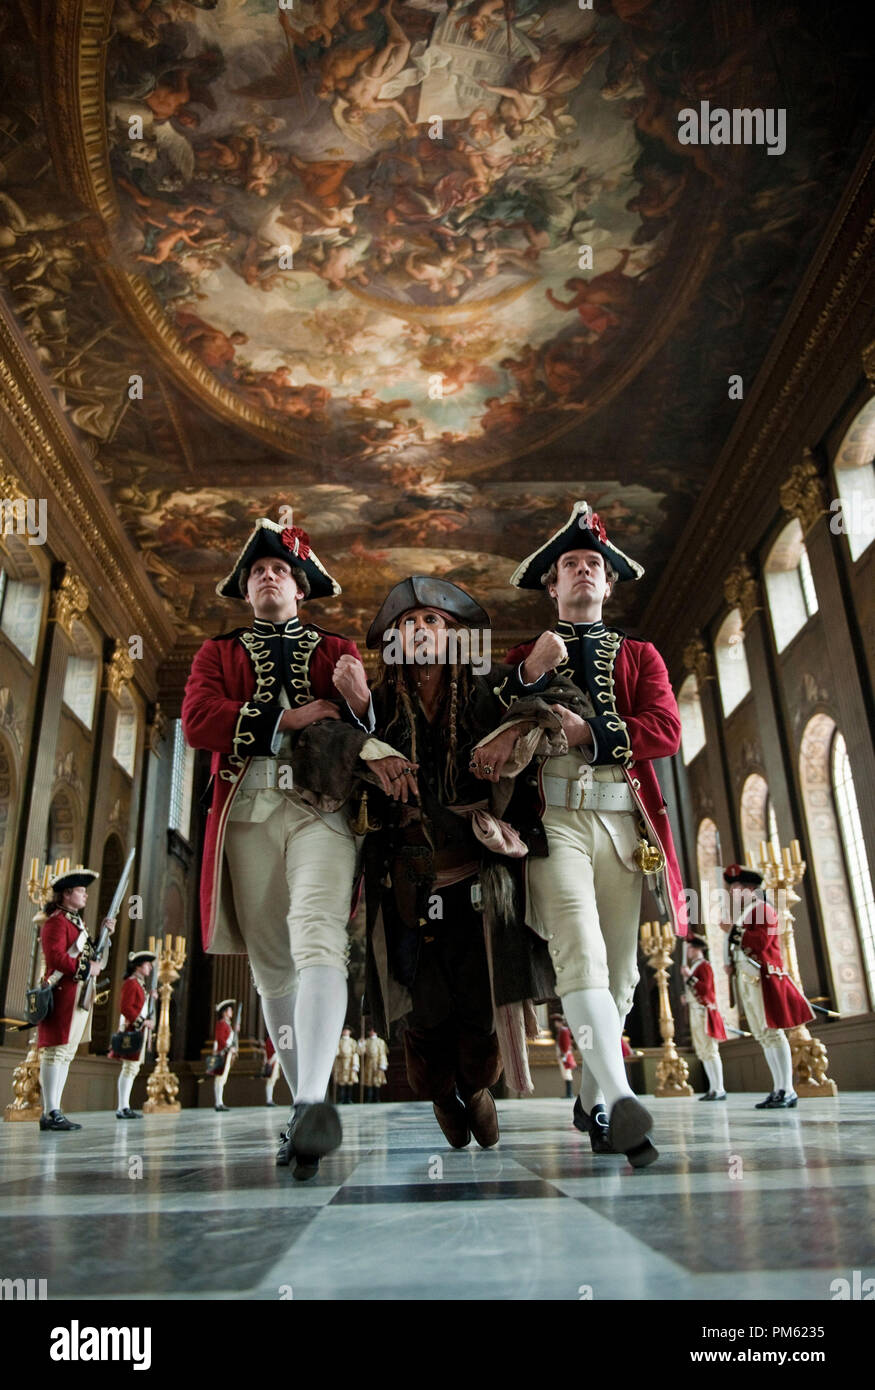 'PIRATES OF THE CARIBBEAN: ON STRANGER TIDES' Captain Jack Sparrow (JOHNNY DEPP) is literally dragged by Royal Guards through the entrance hall of St. James Palace in London for a forced audience with King George. Stock Photo